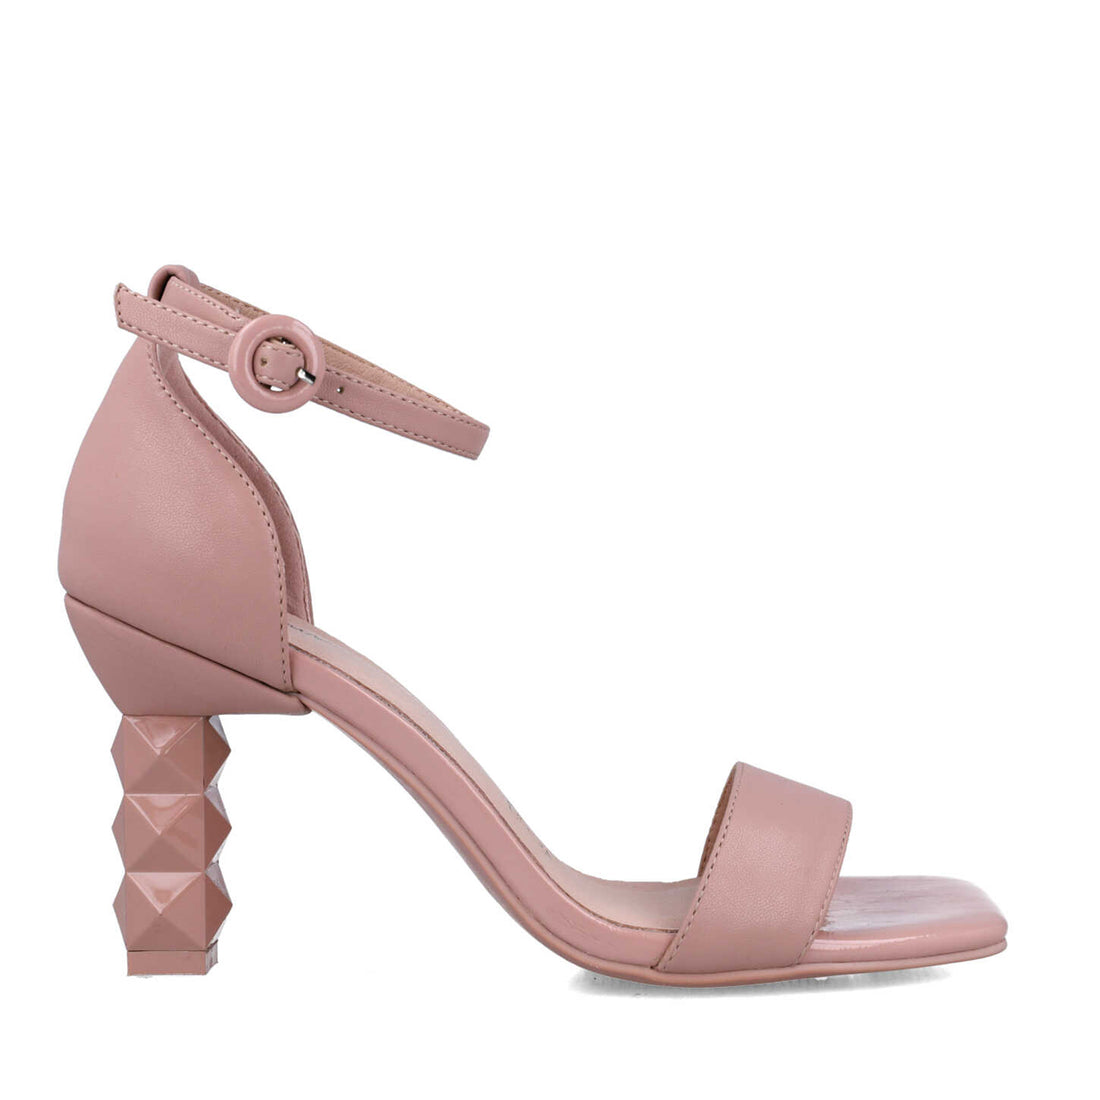 Pink Ankle-Strap Sandals With Studded Heel